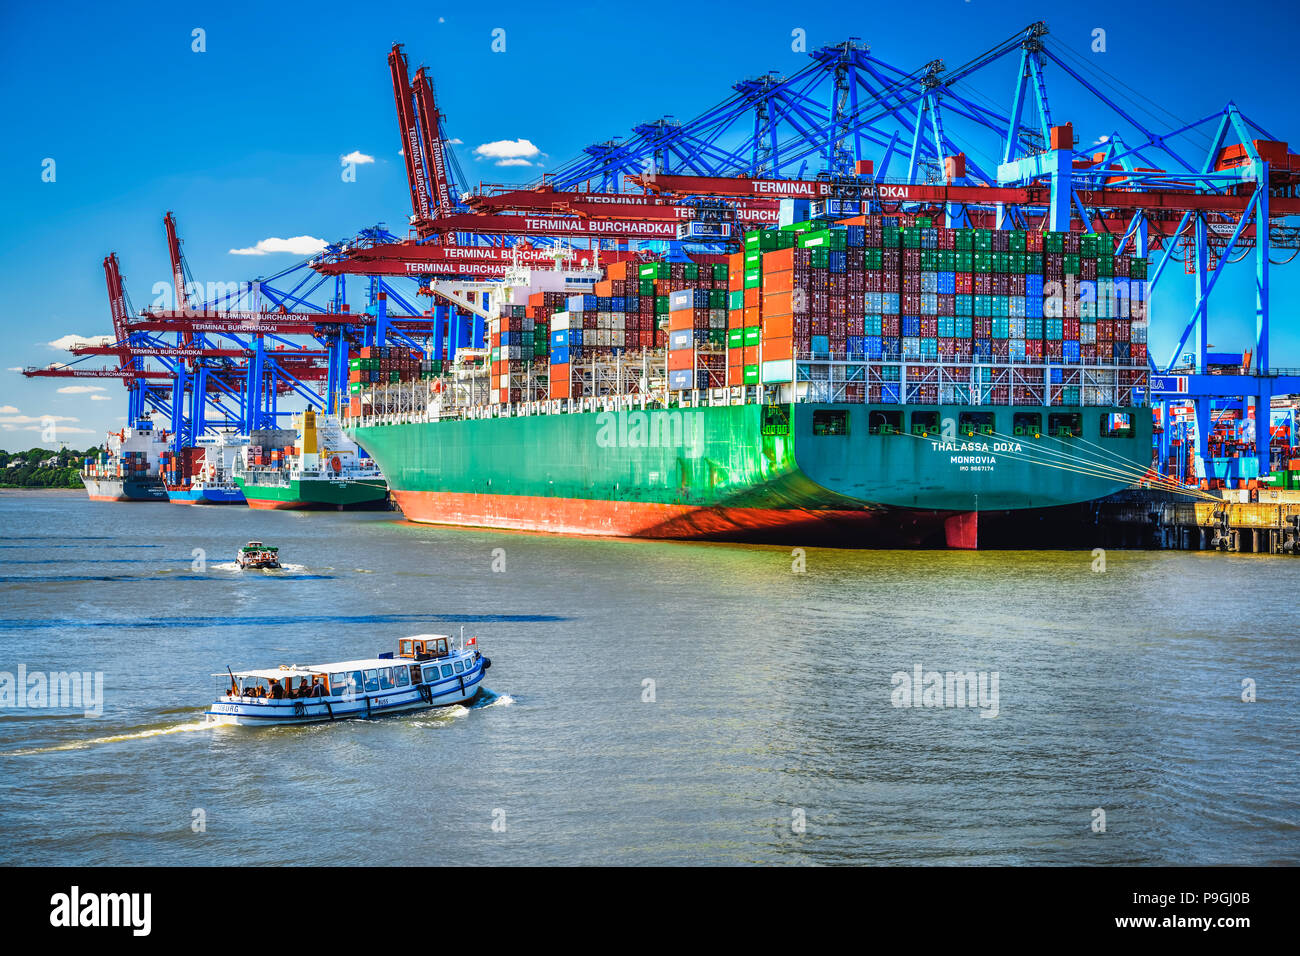 Container ship in the Port of Hamburg, Germany, Europe Stock Photo